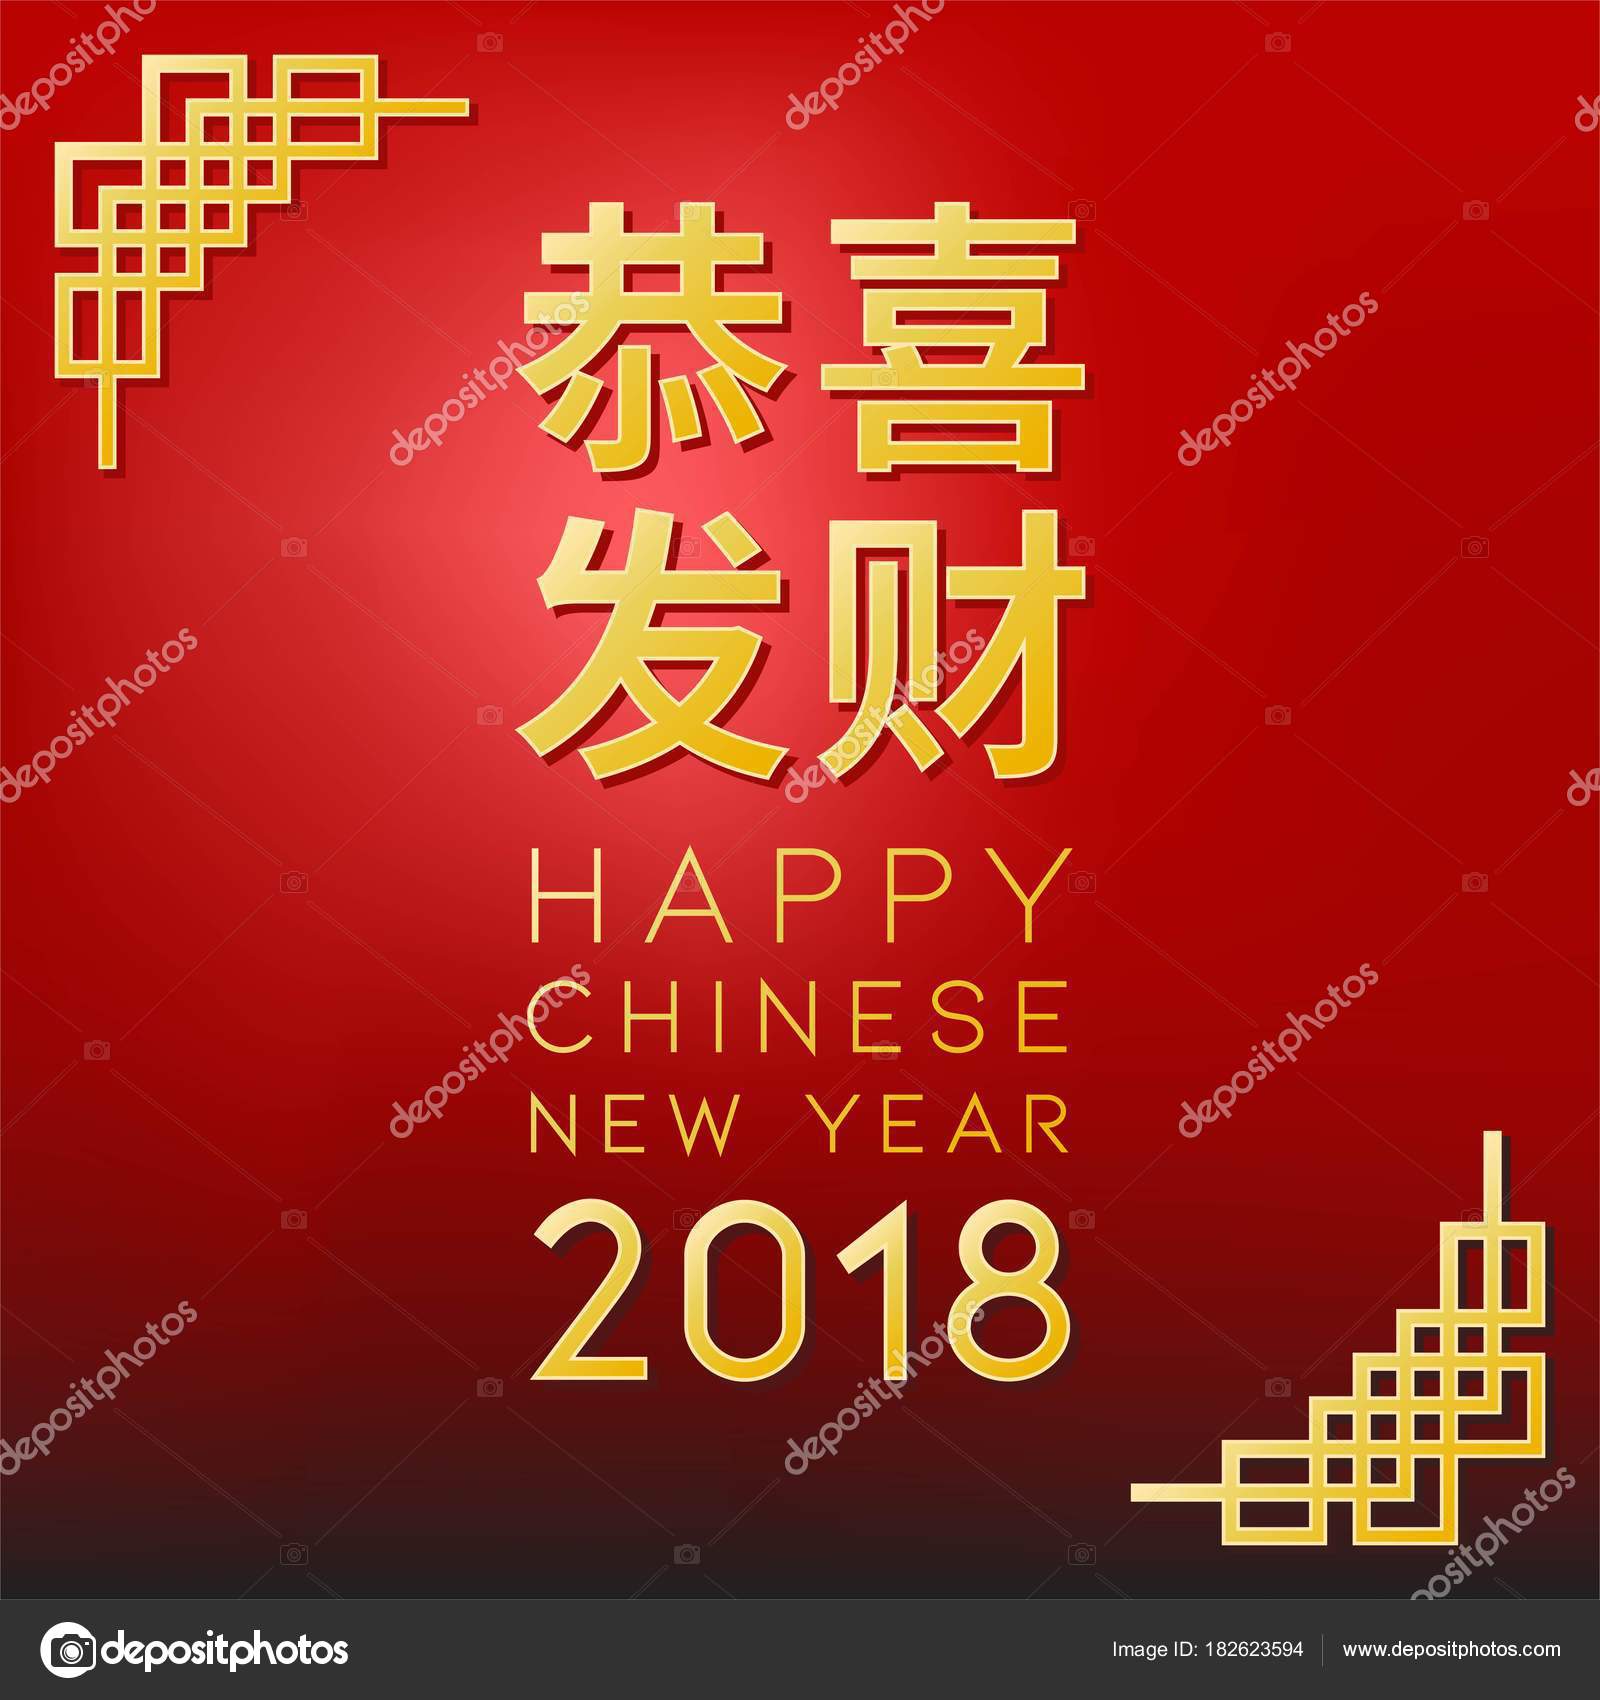 Happy Chinese New Year 2018 Poster Chinese Alphabet Gong Cai Vector Image By C Lukpedclub Gmail Com Vector Stock 182623594